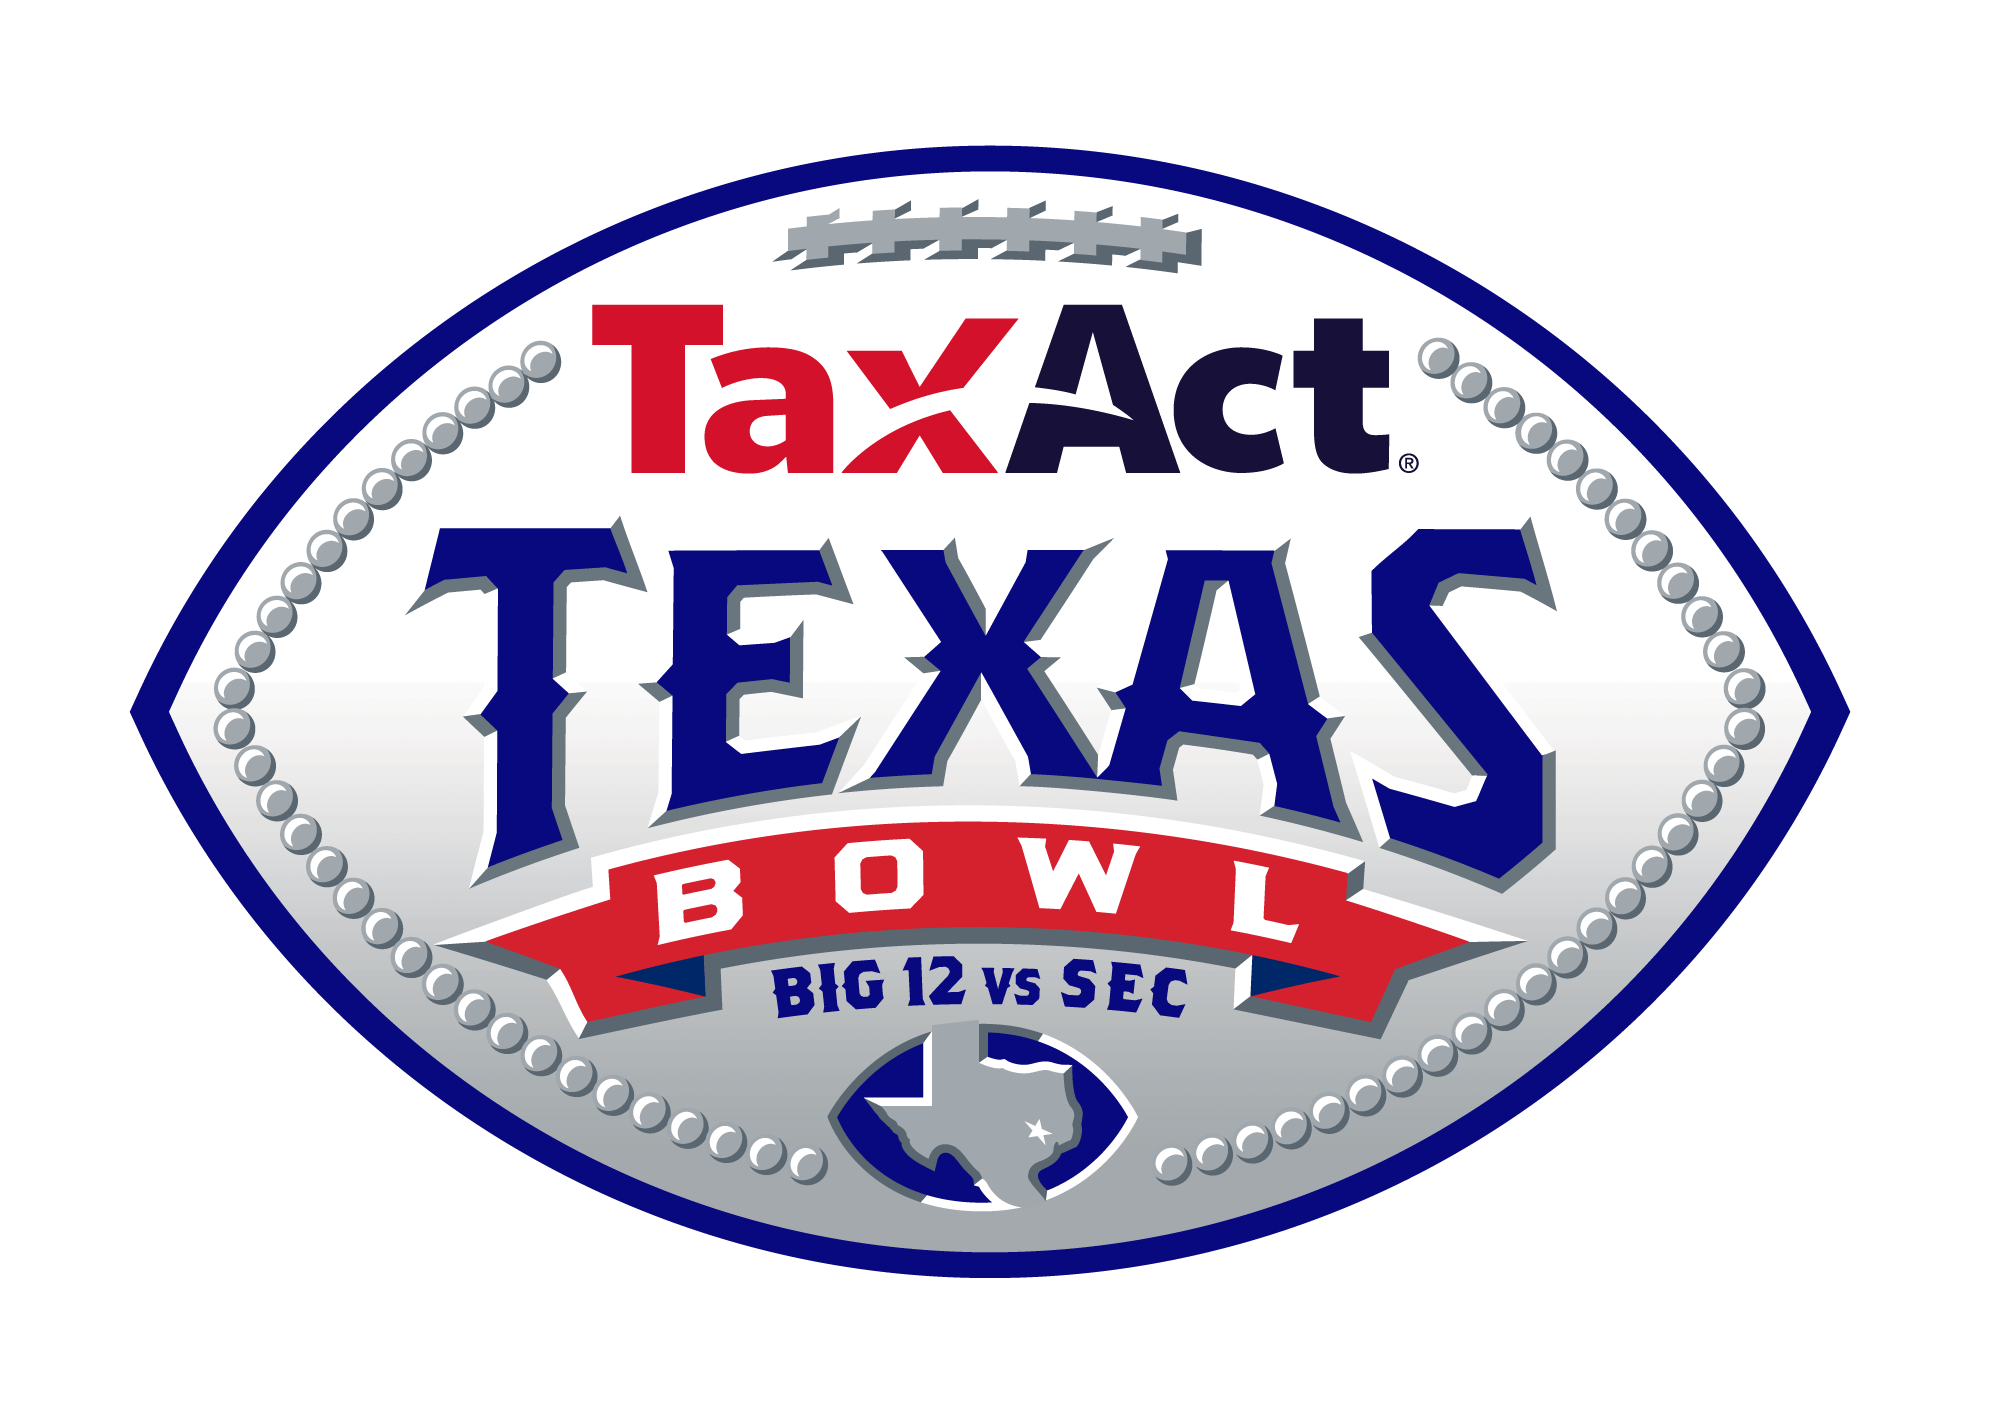 TaxAct® Renews Title Sponsorship of Texas Bowl Game as Part of a Multi